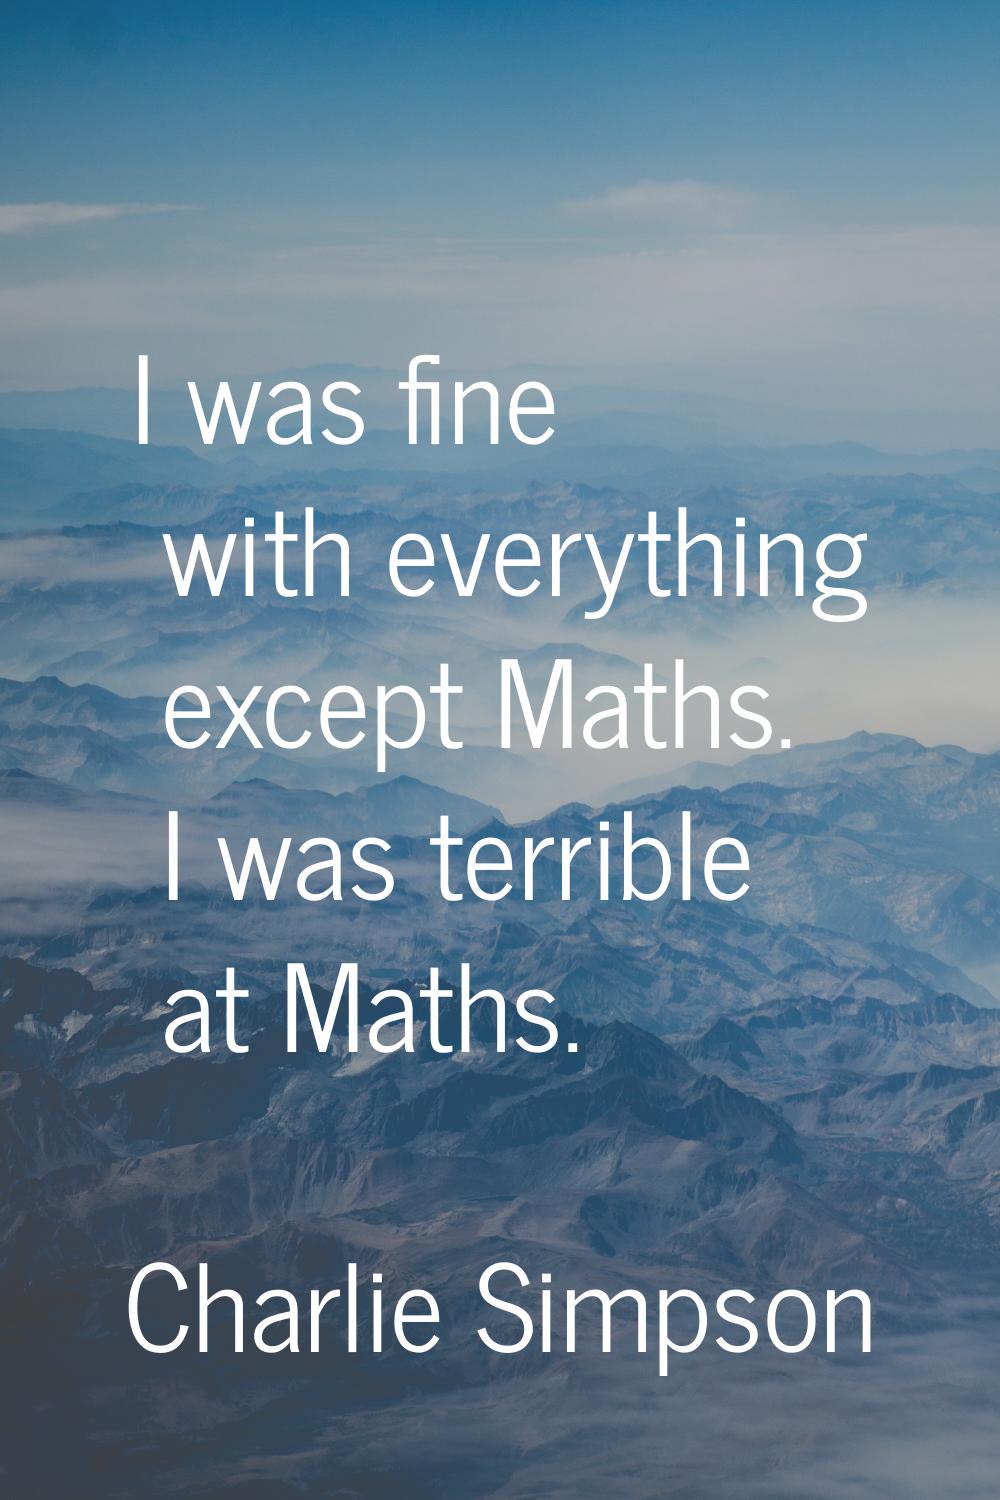 I was fine with everything except Maths. I was terrible at Maths.